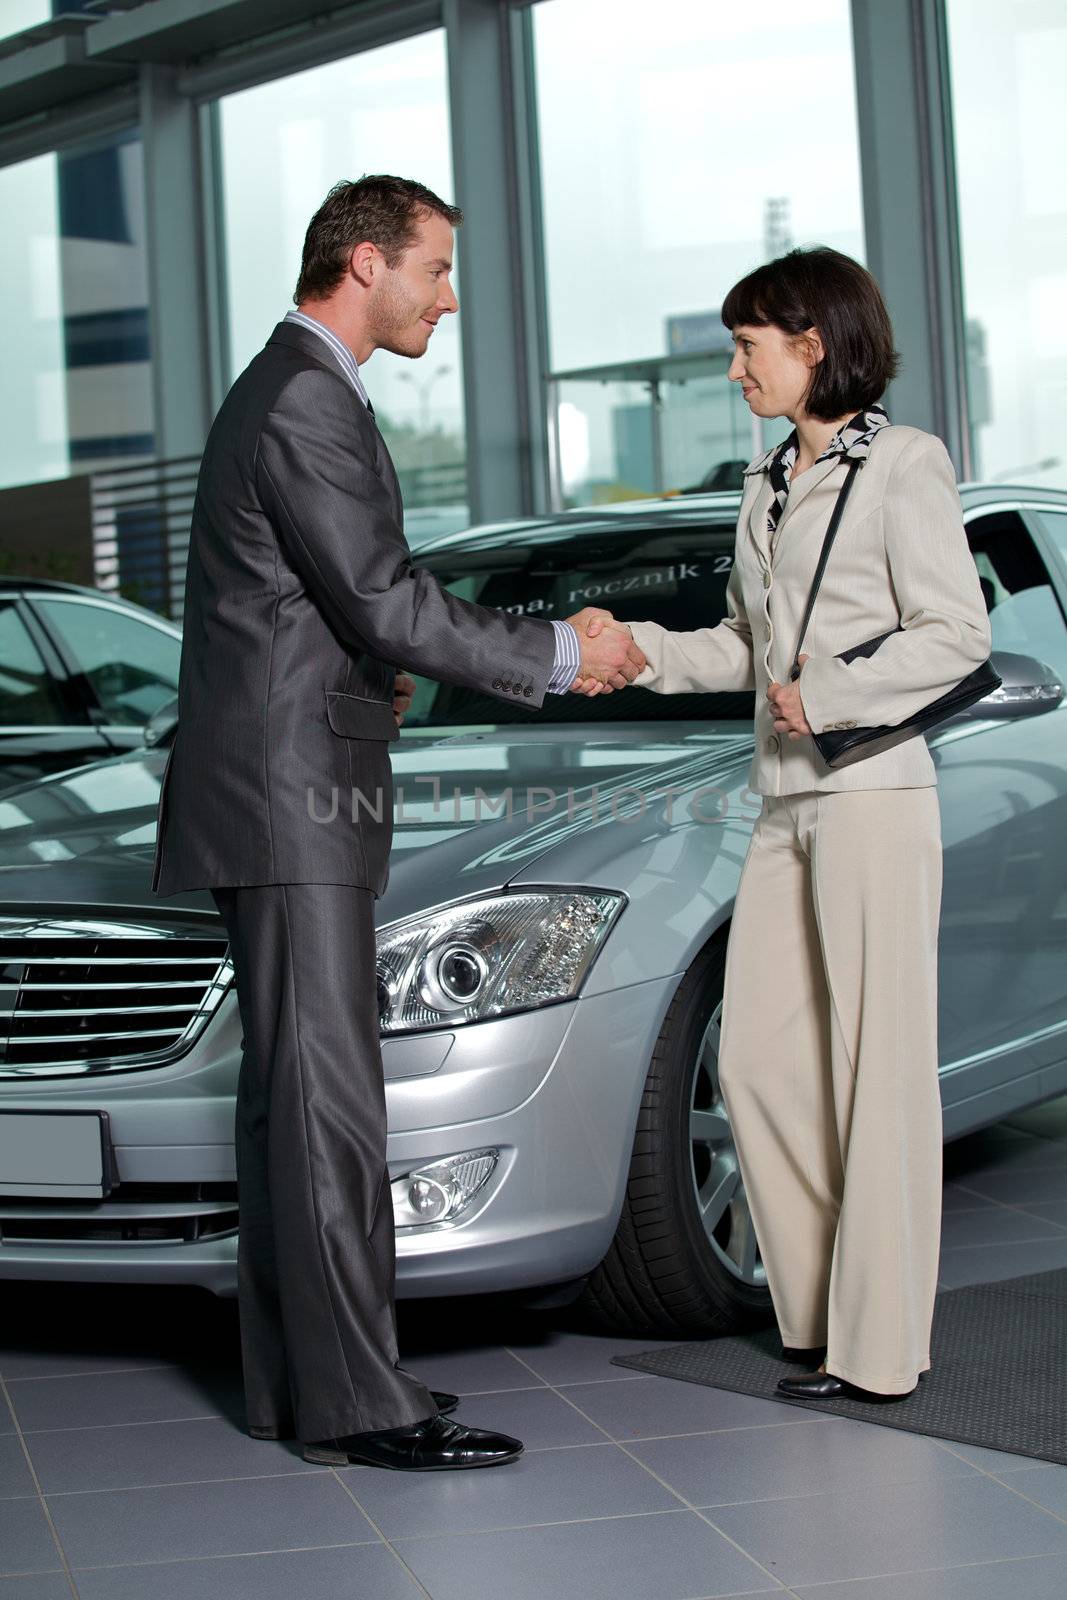 Car salesperson shaking hands with customer at showroom
